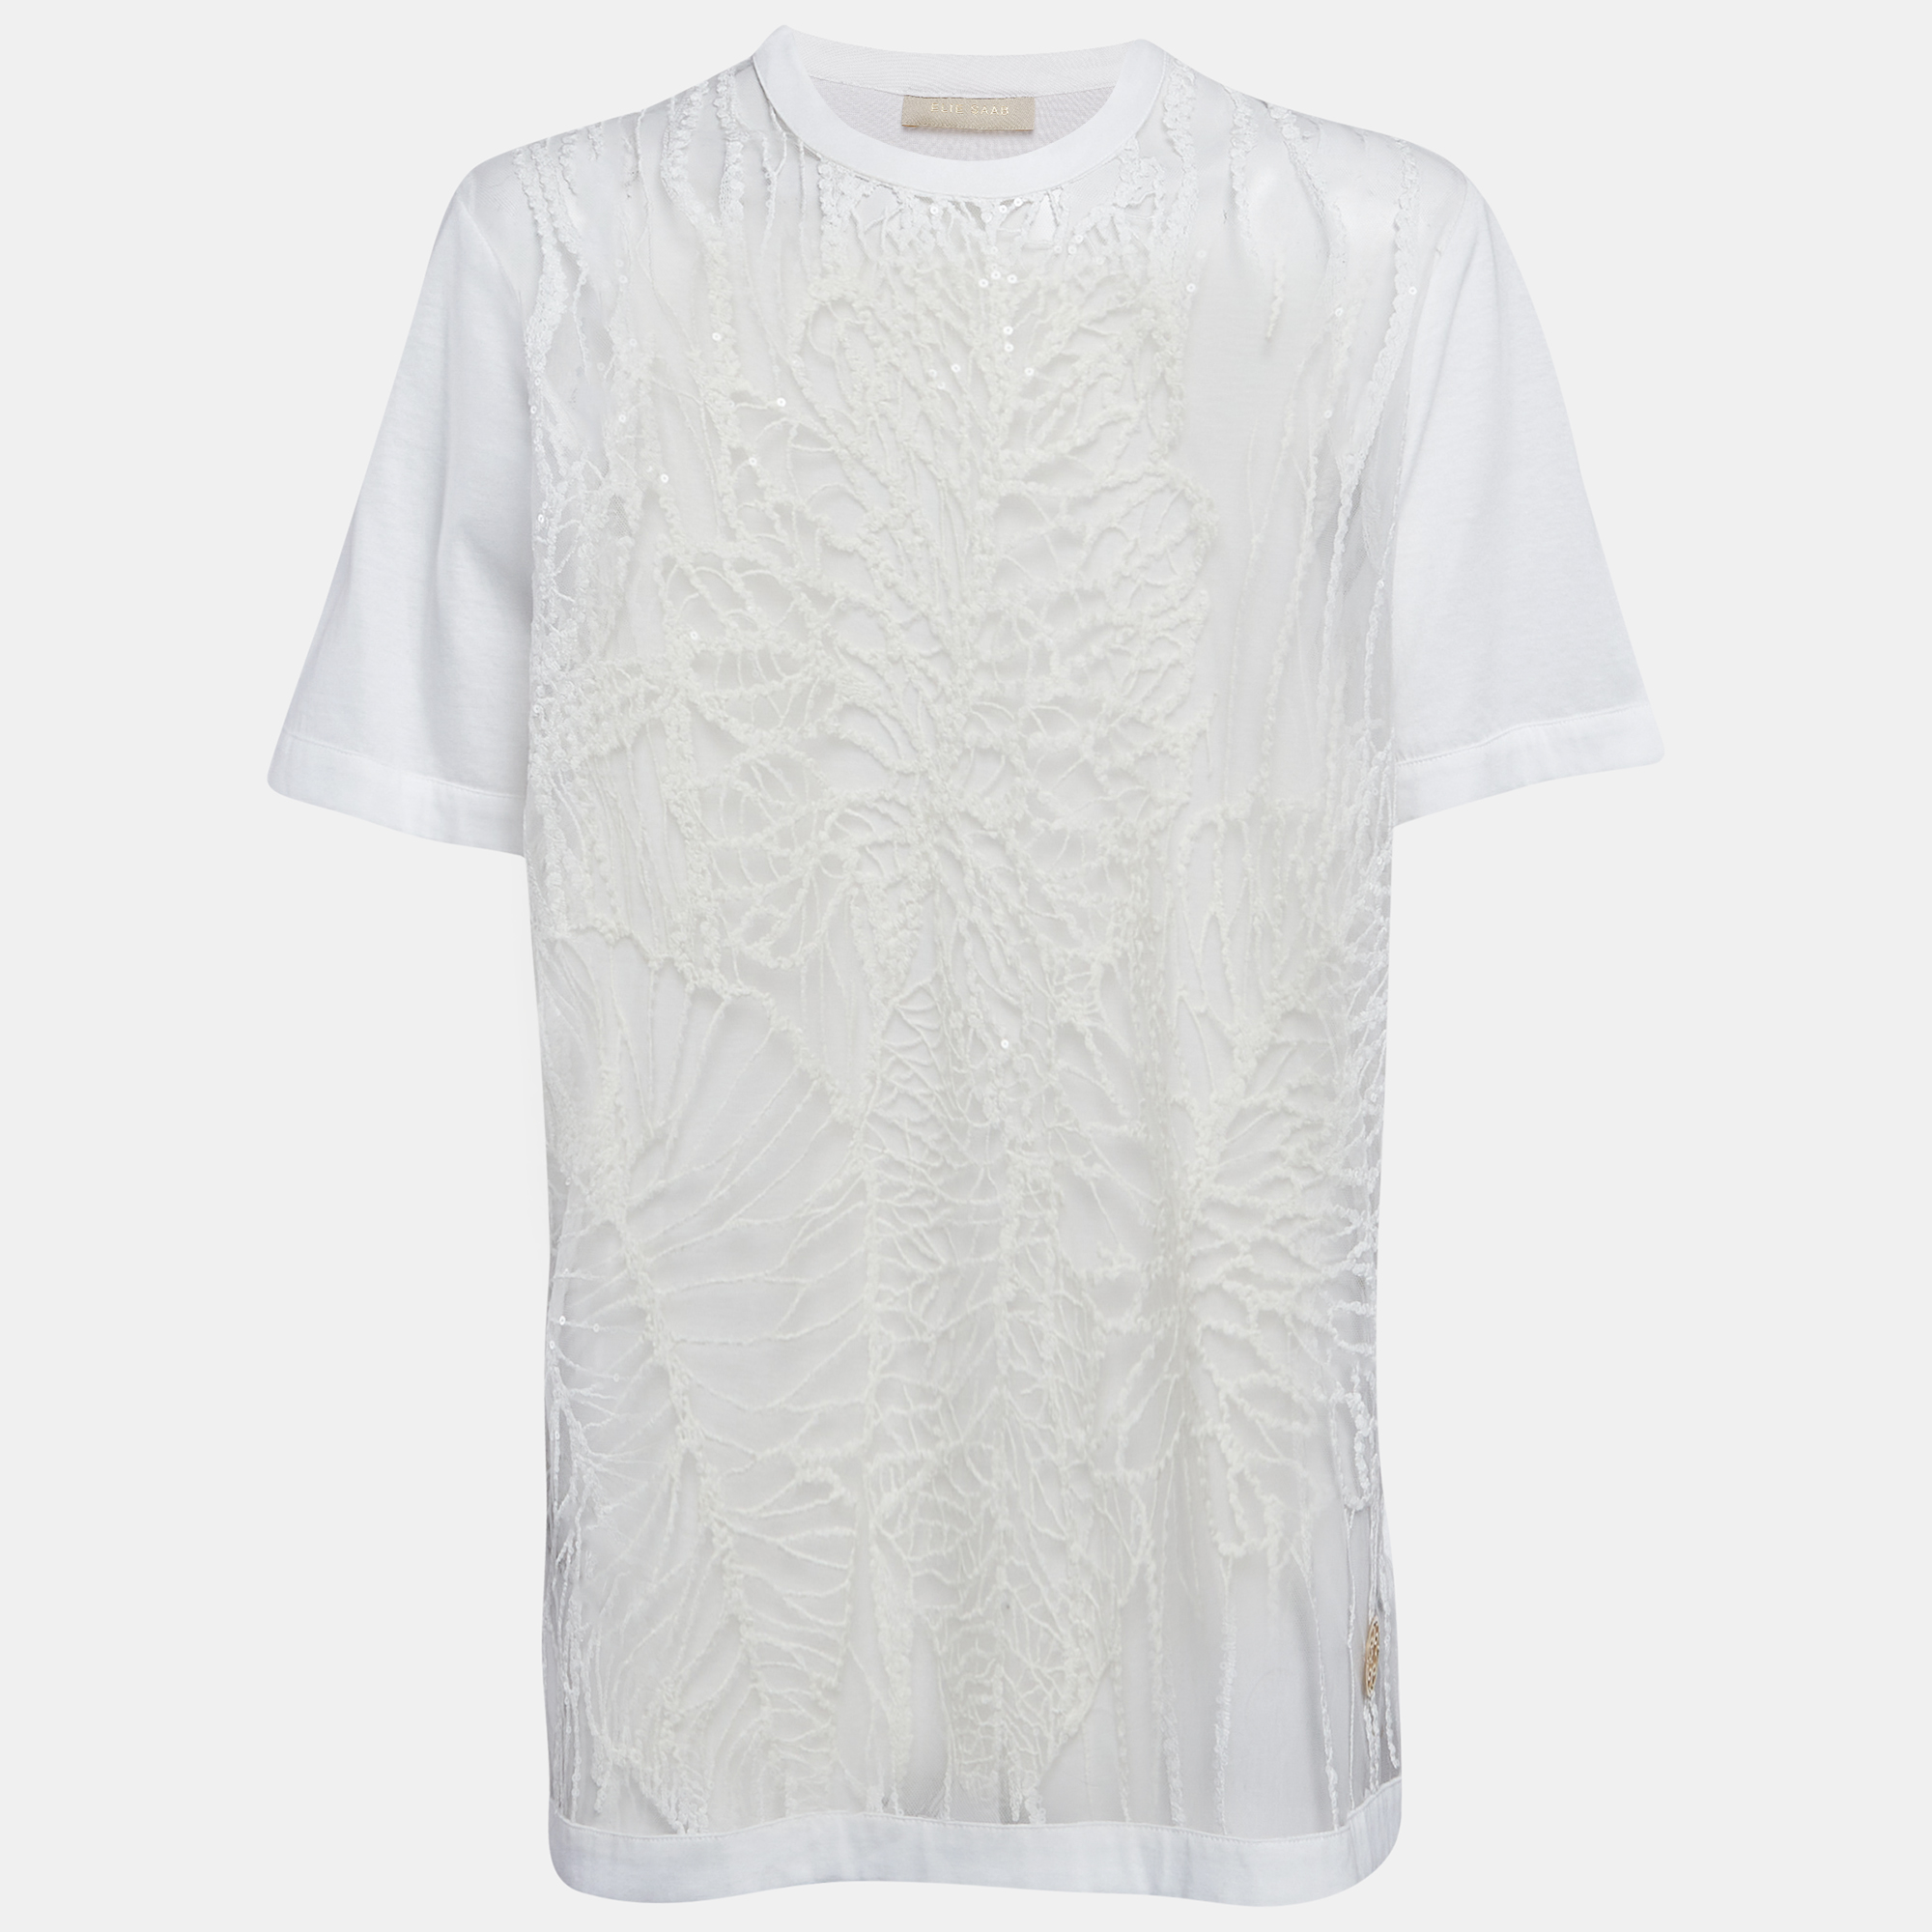 Elie saab white embroidered tulle and cotton knit sheer t-shirt s